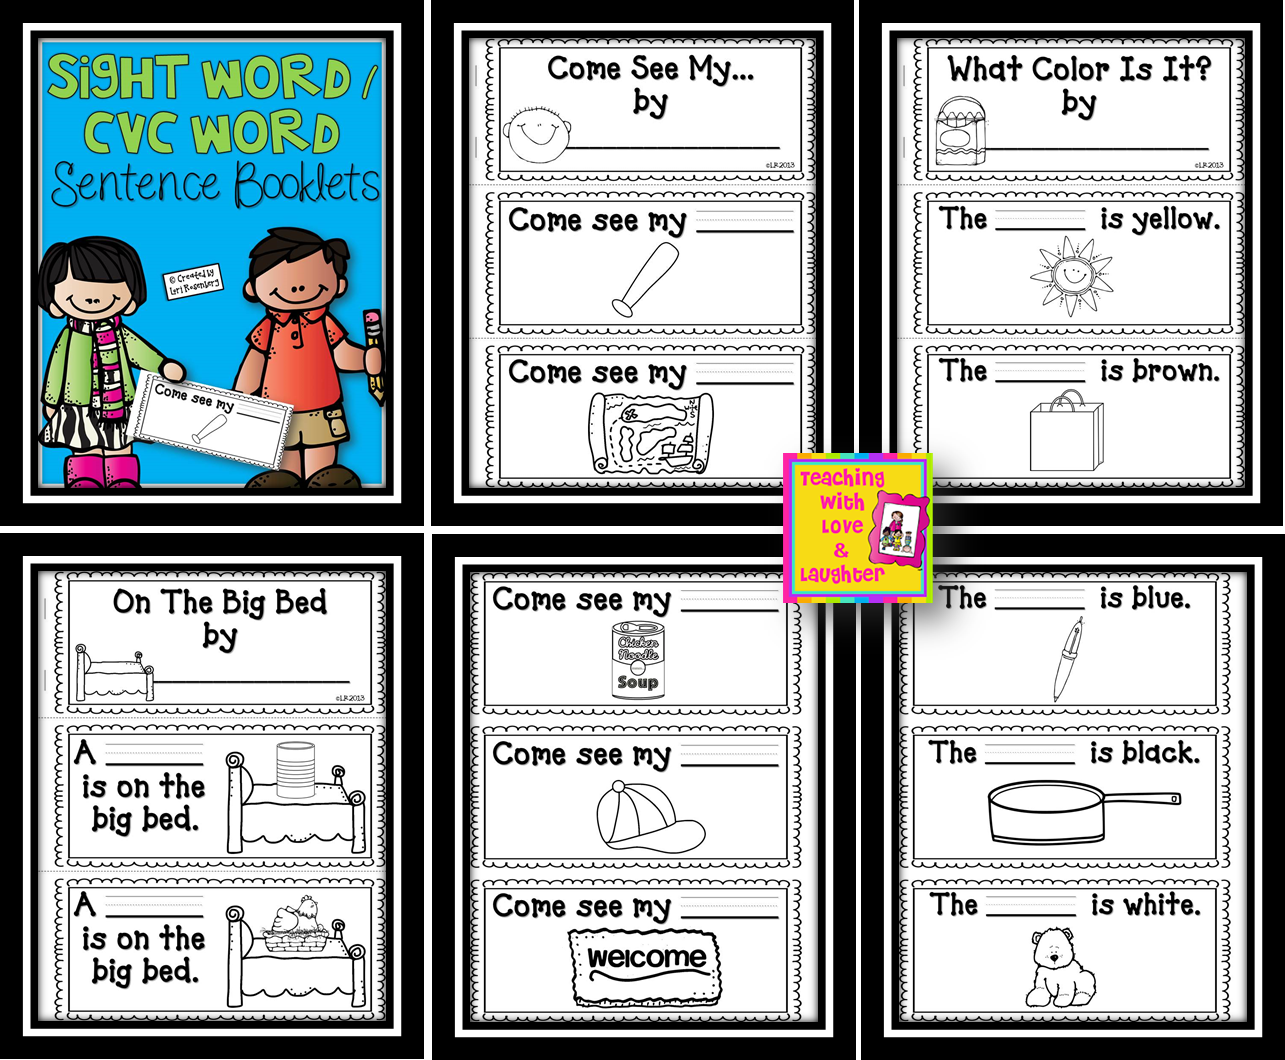 Teaching With Love and Laughter: Sight Word / CVC Word Sentence Booklets